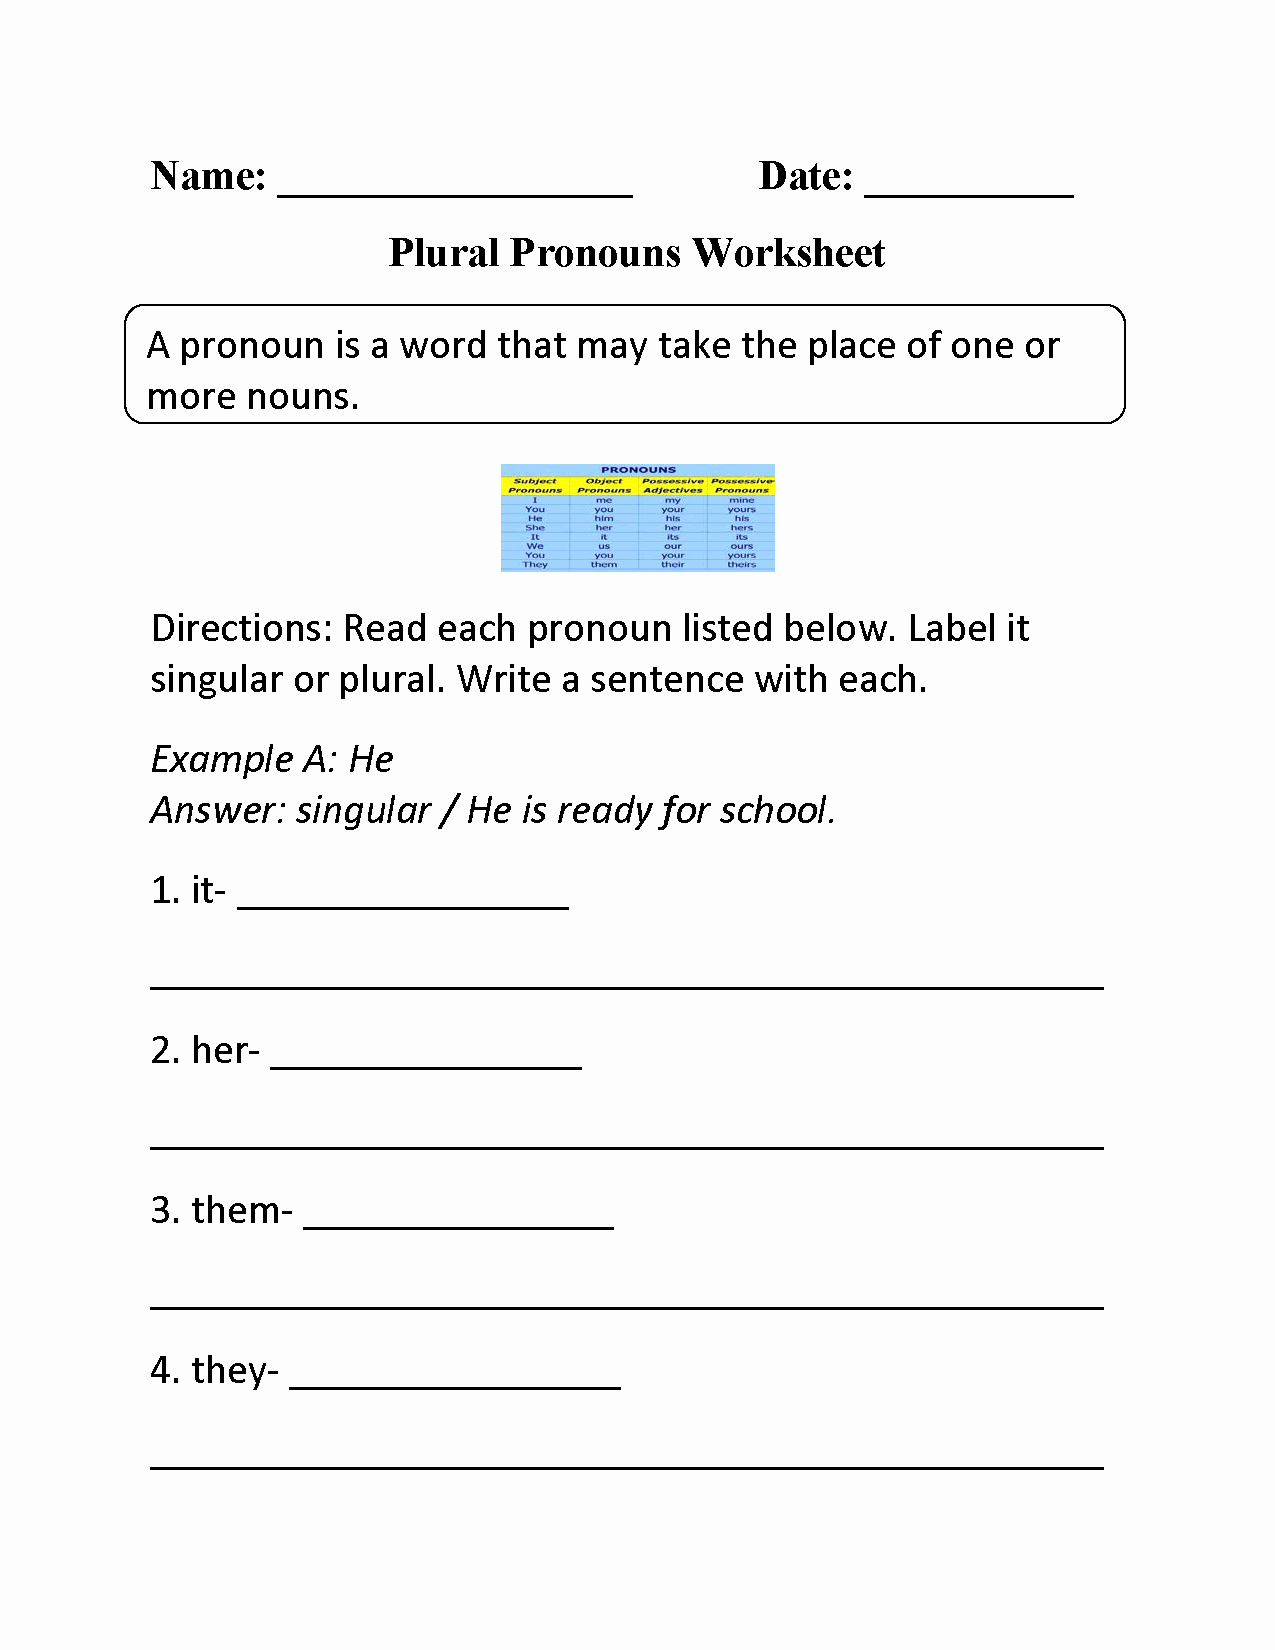 Pronouns and Antecedents Worksheet New Word Usage Worksheets